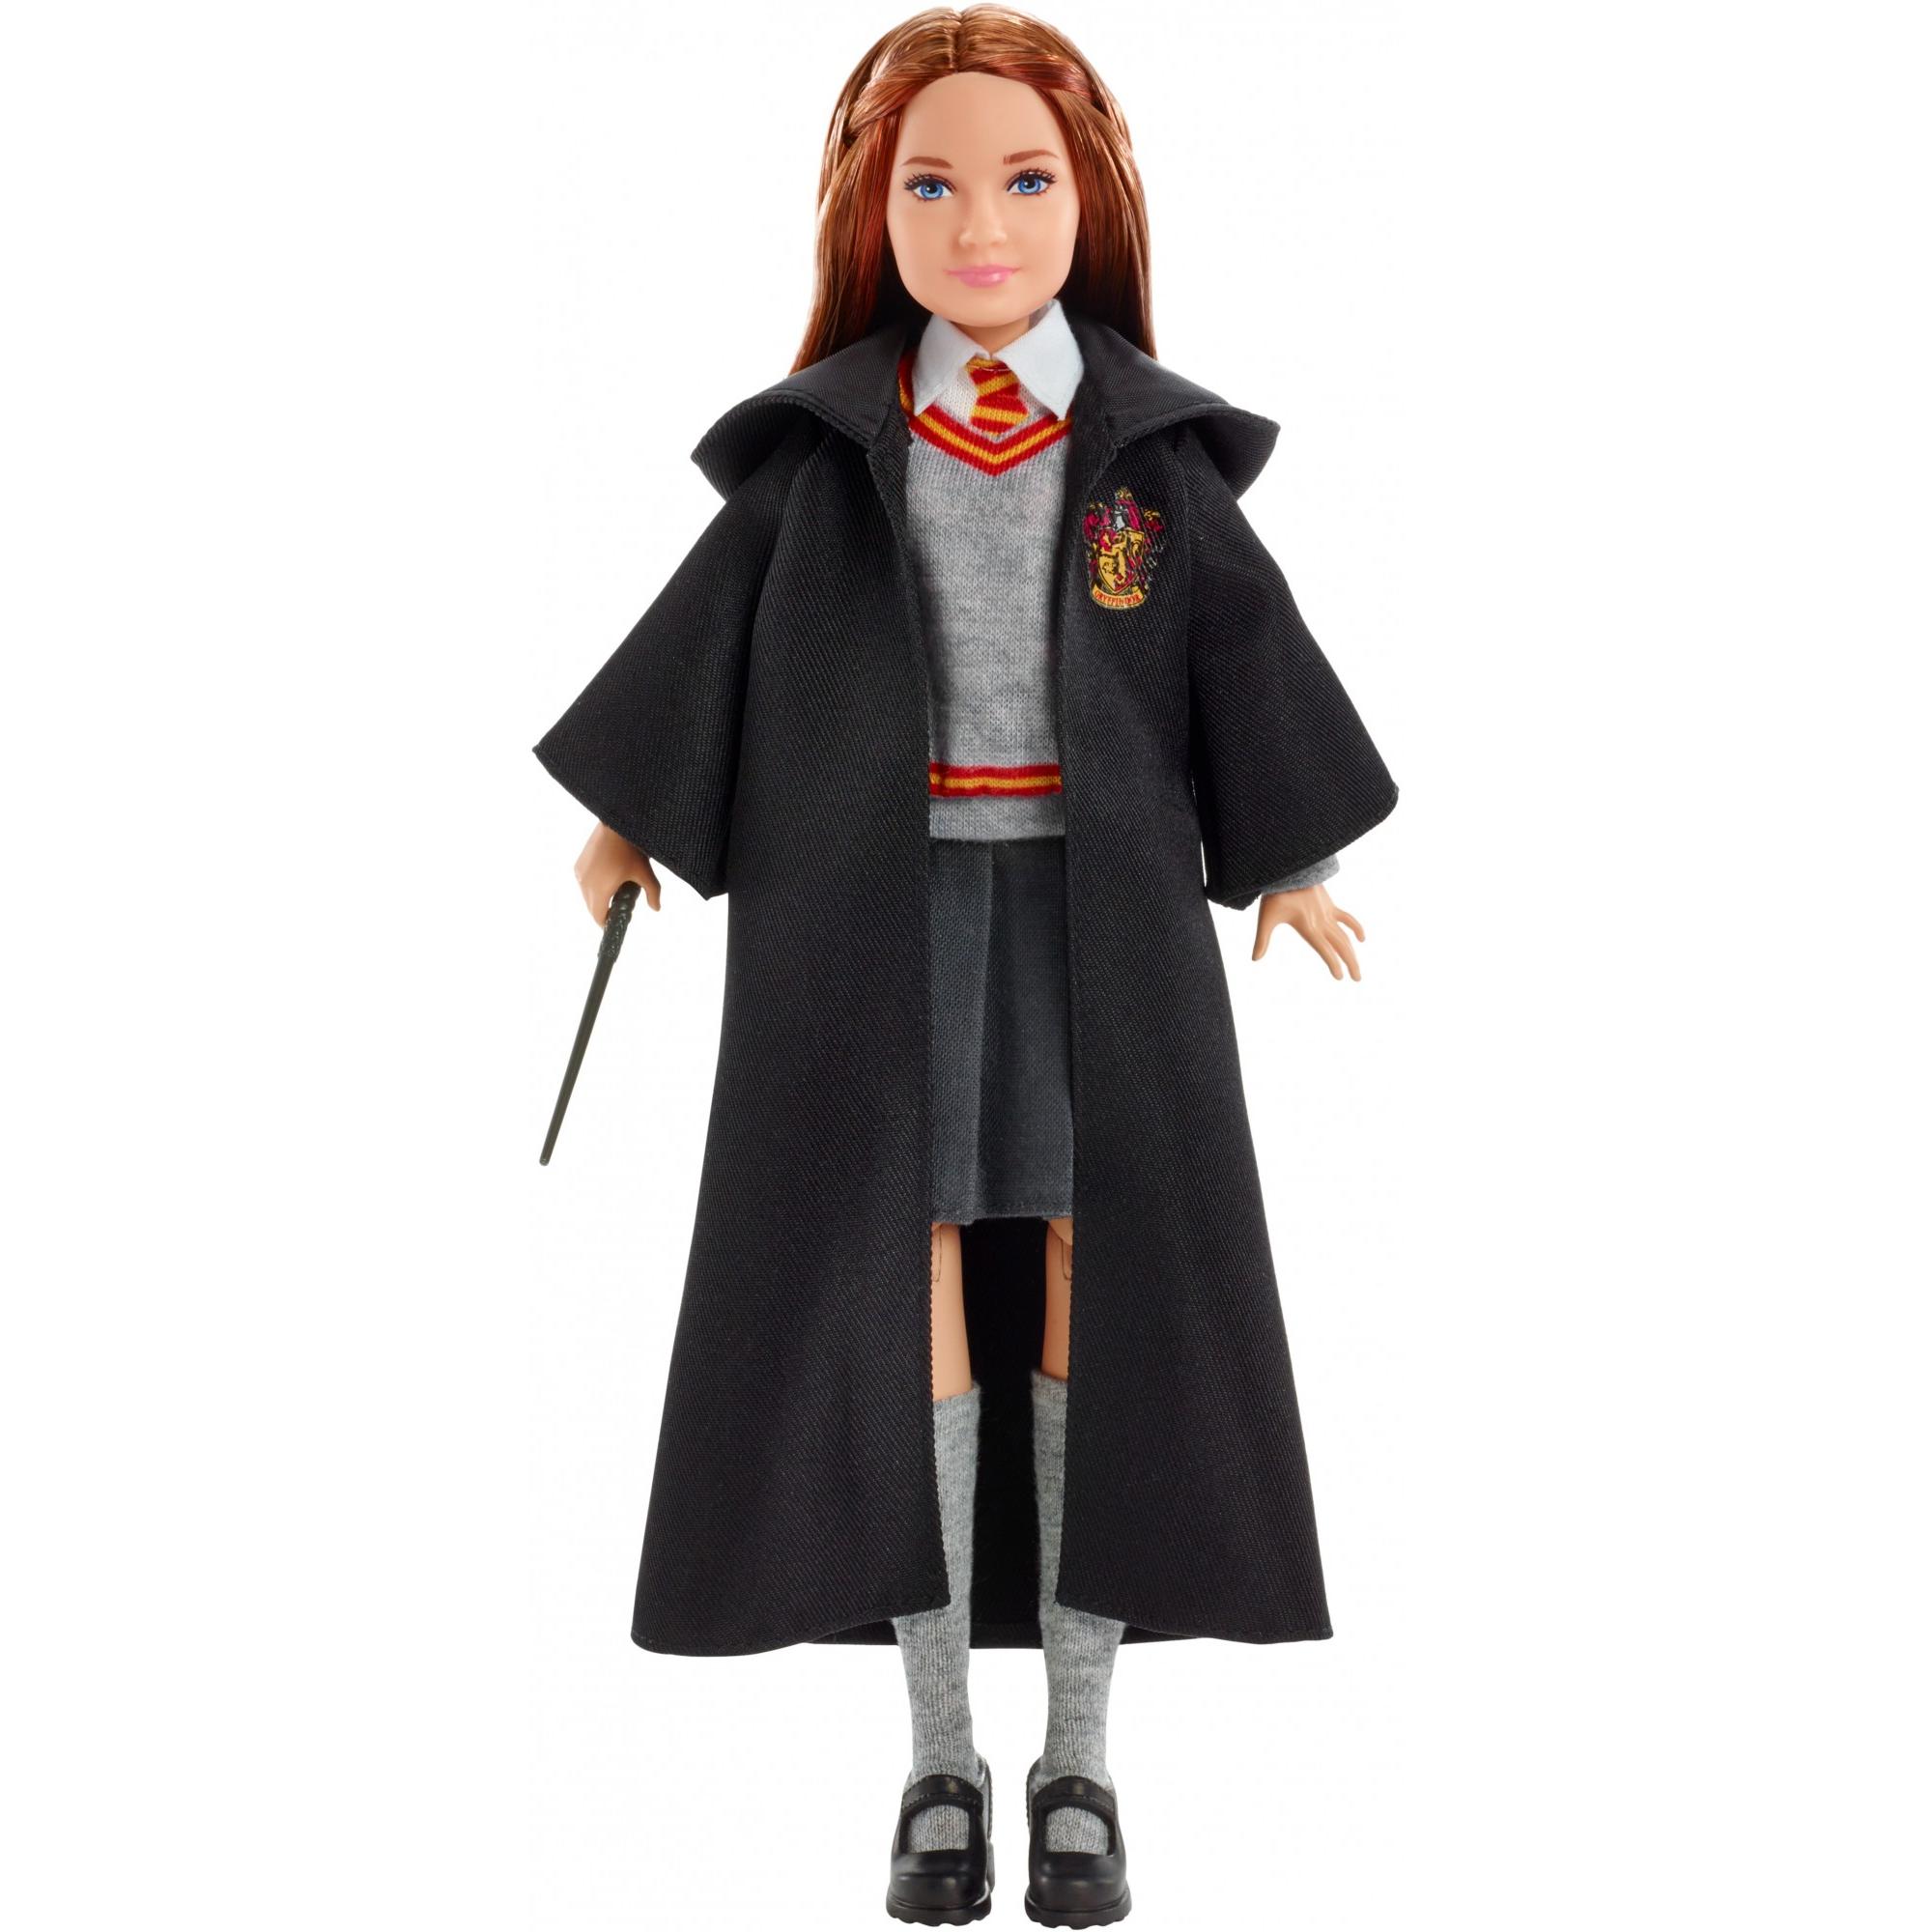 Harry Potter Ginny Weasley Film-Inspired Collector Doll Playset - image 5 of 7